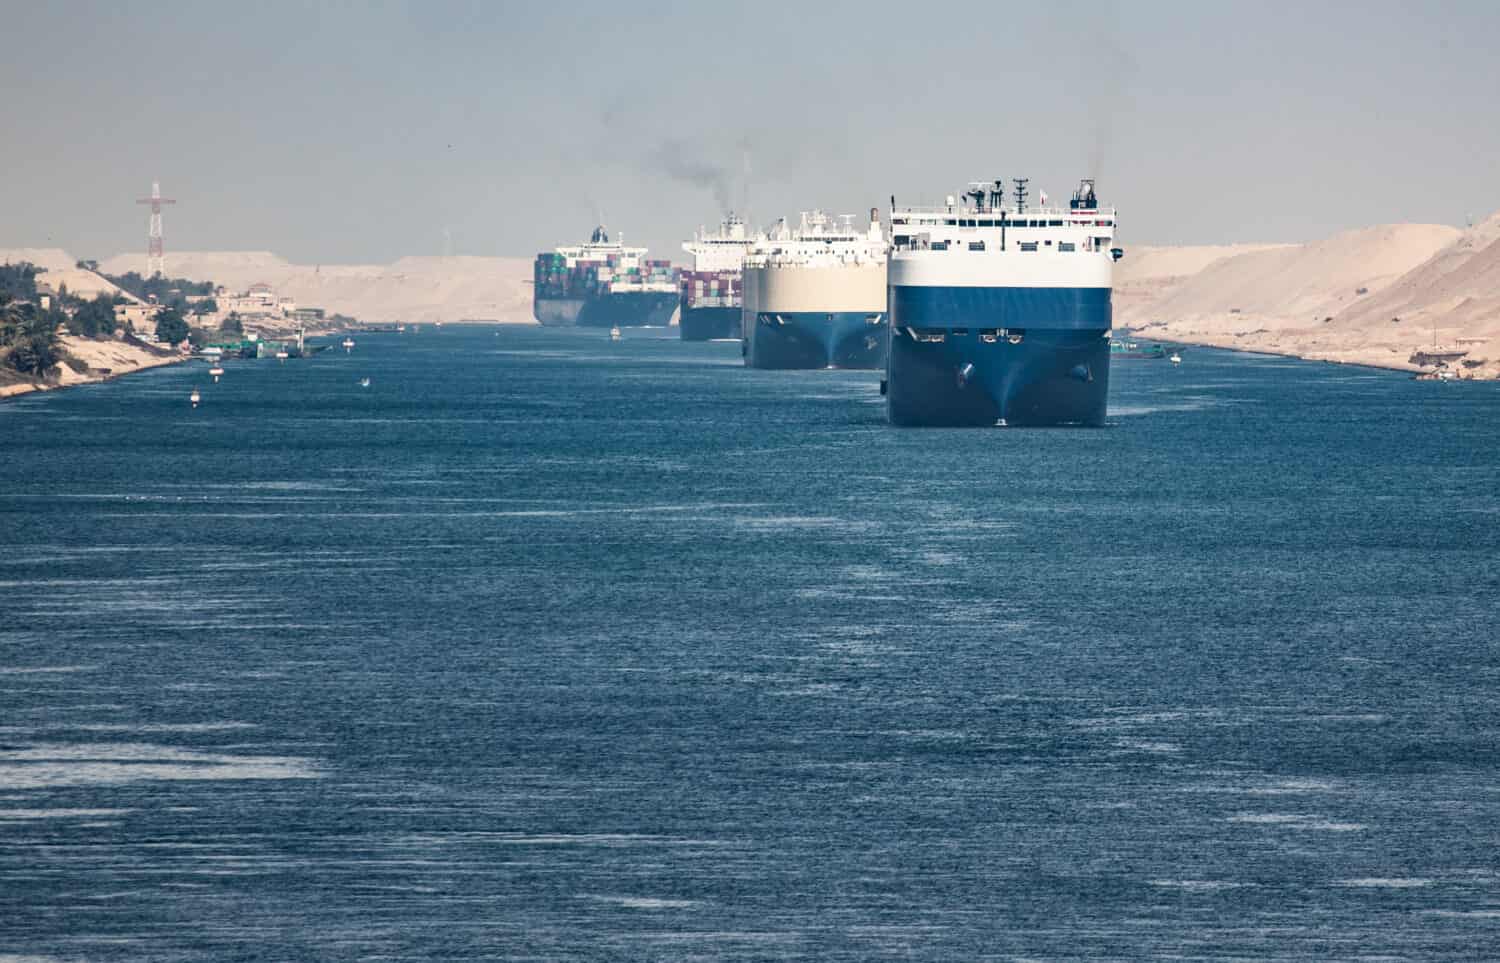 The Suez Canal is a shipping canal in Egypt.A cargo ship drives the Suez Canal.